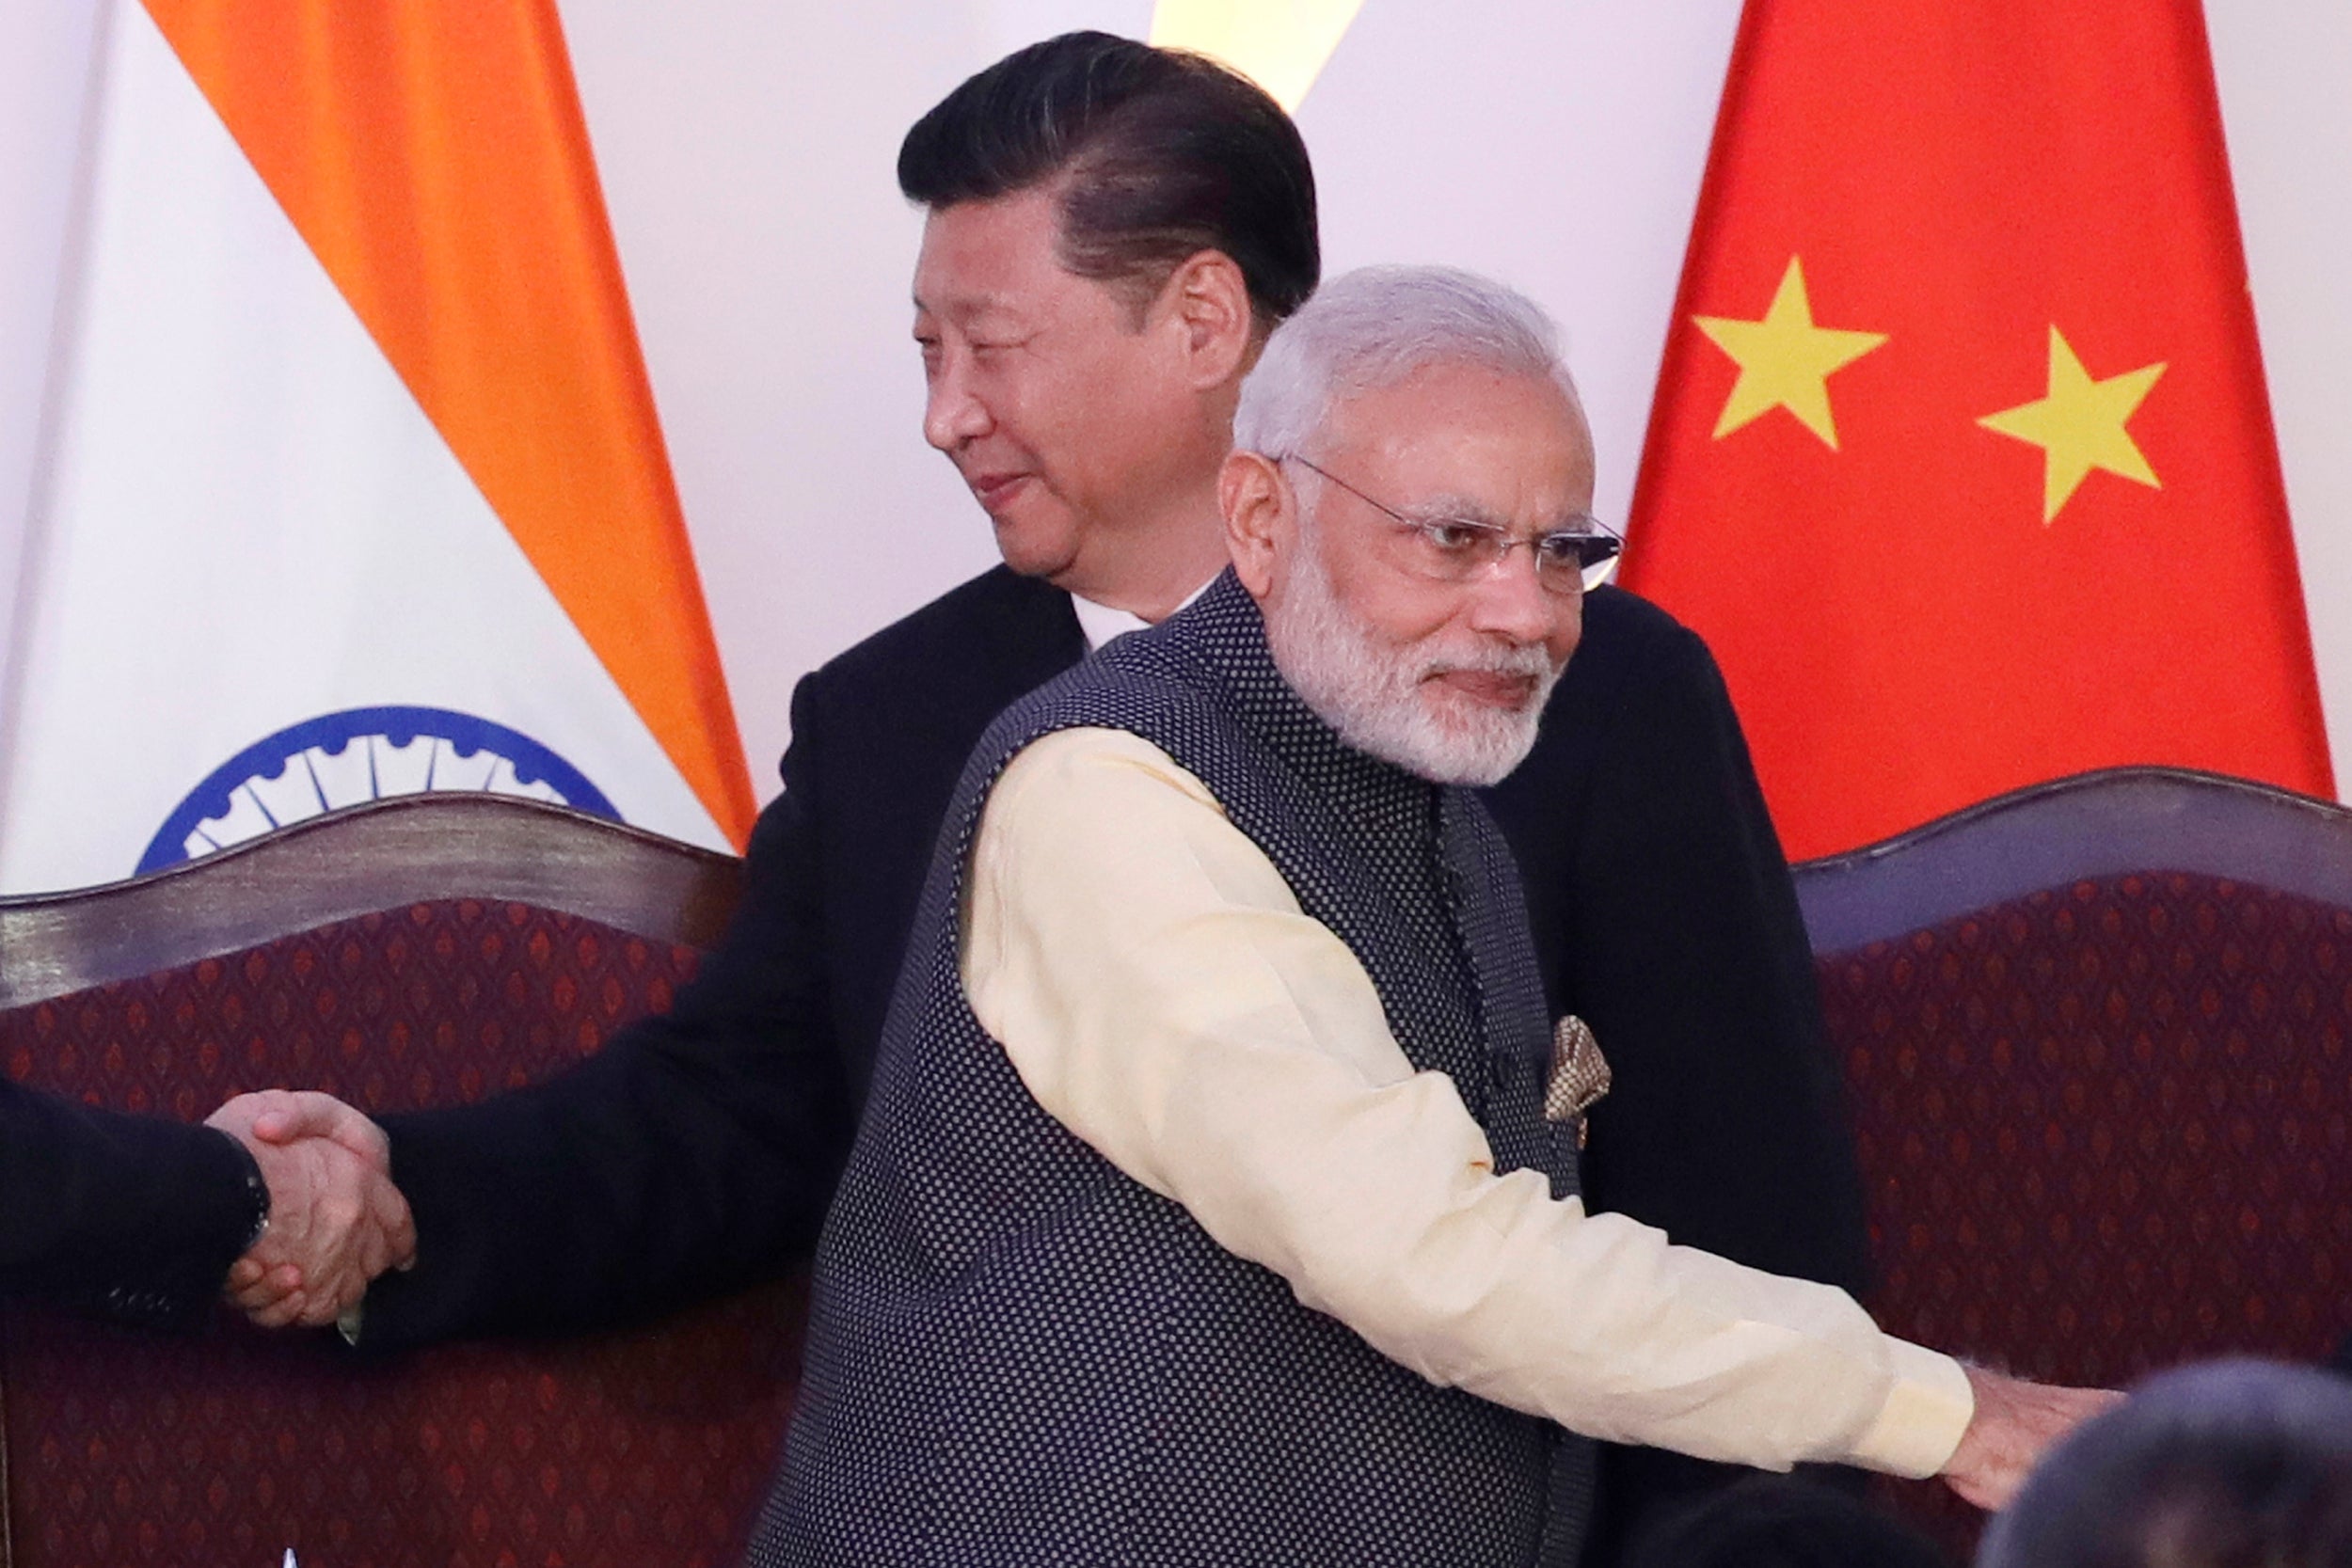 Indian prime minister Narendra Modi and Chinese president Xi Jinping at a summit in Goa, India. Tensions along the China-India border high in the Himalayas have flared again in recent weeks